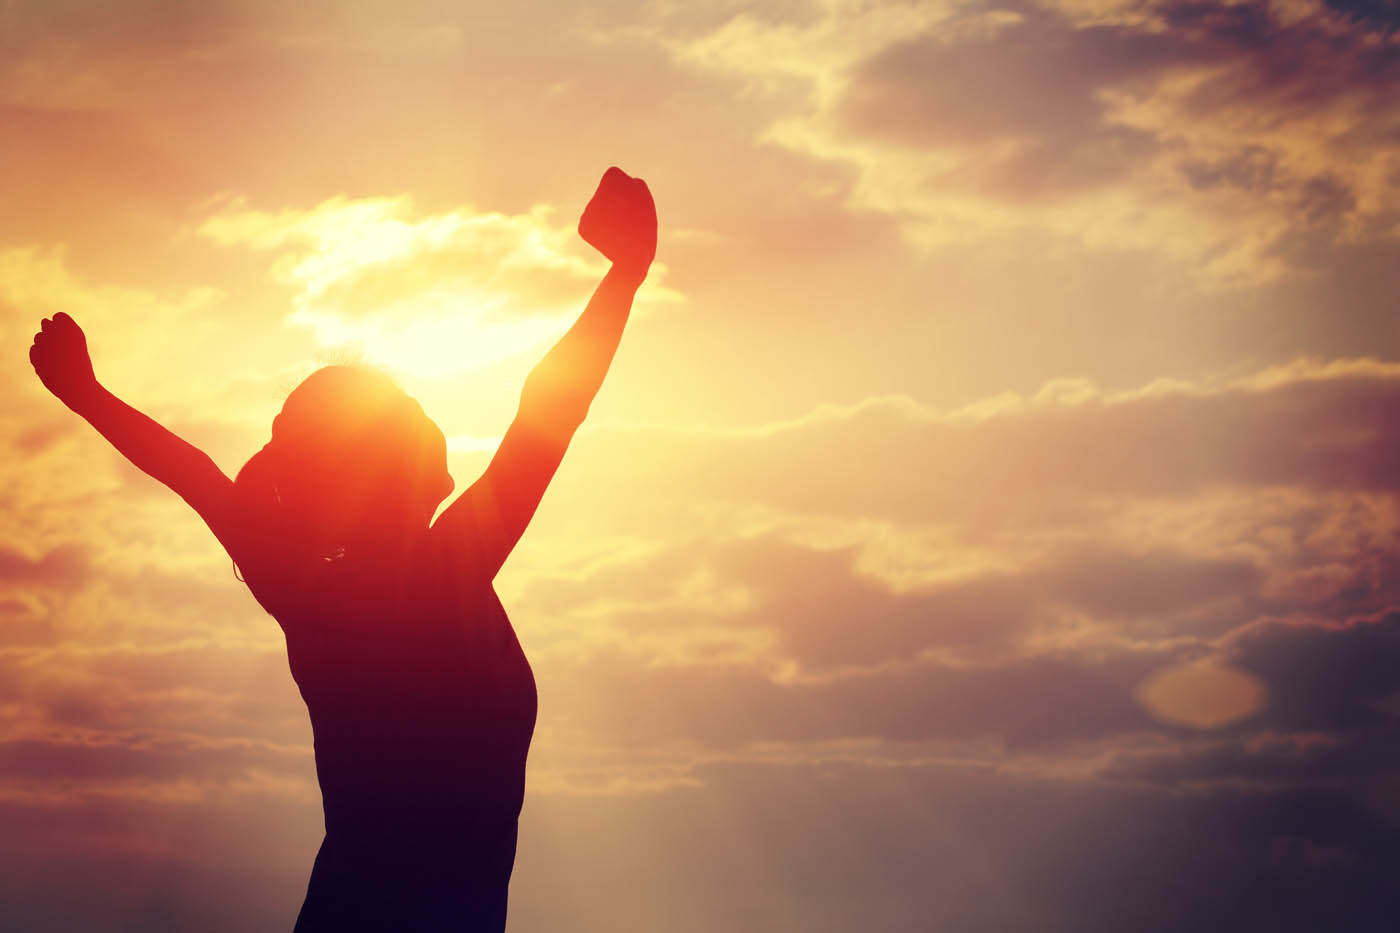 A woman standing in the light with her arms up in the air - learn how you can get relief with Light Lounge's back pain management.